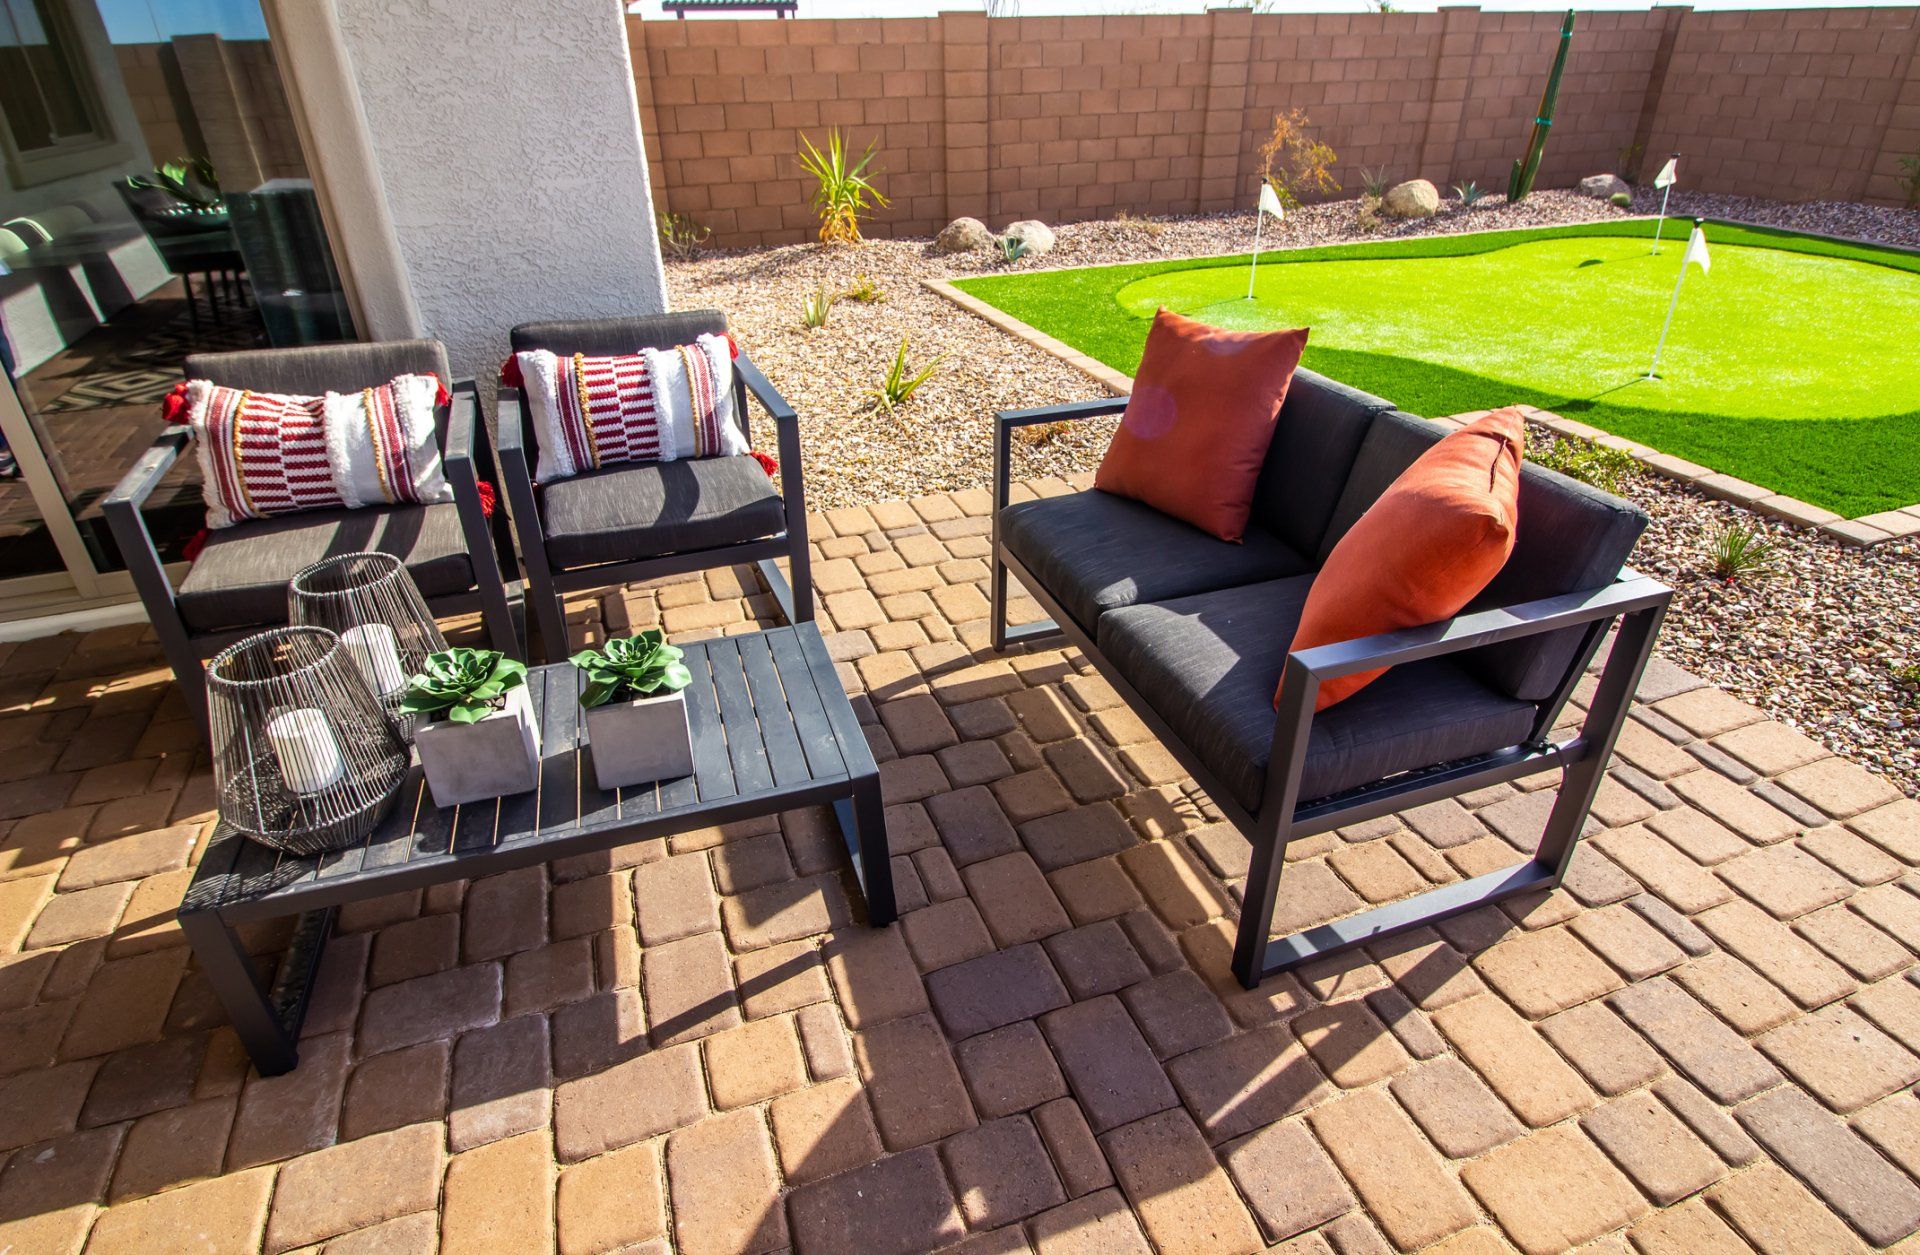 Rear Patio with Chairs and Sofa with Brick Paver - Chula Vista, CA - Velazquez Patio Construction Inc